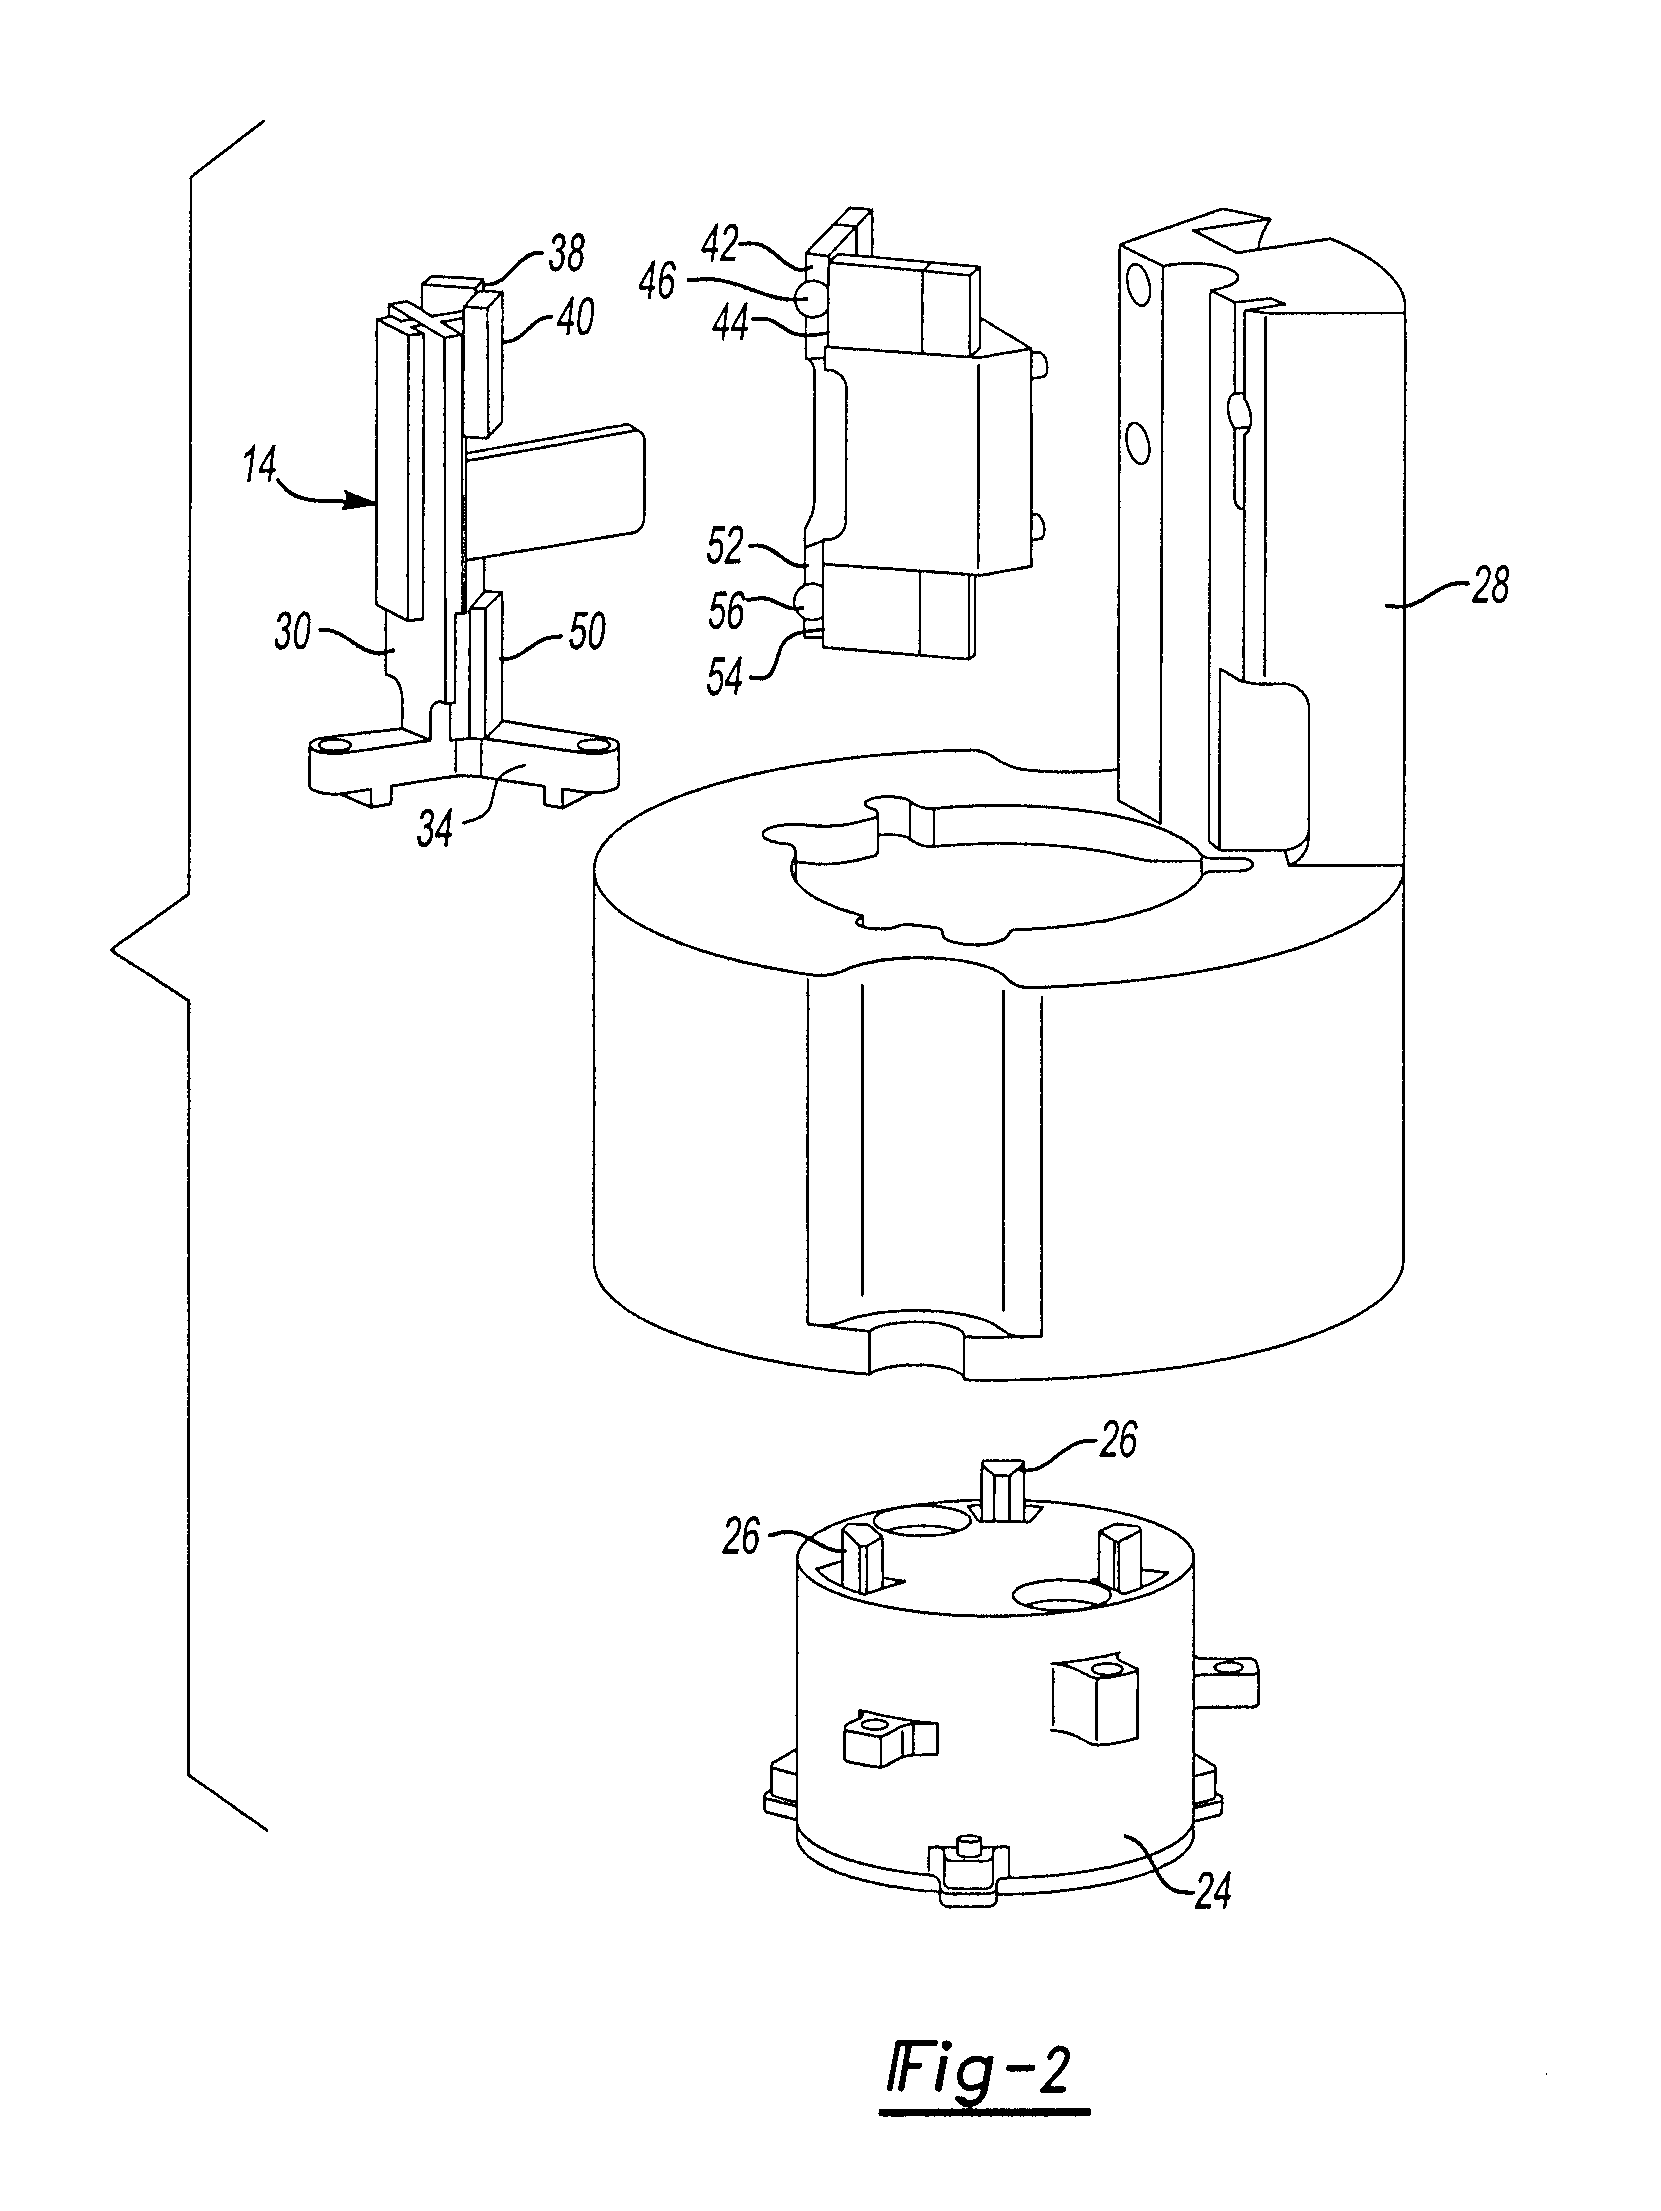 Magnetically preloaded anti-rotation guide for a transducer